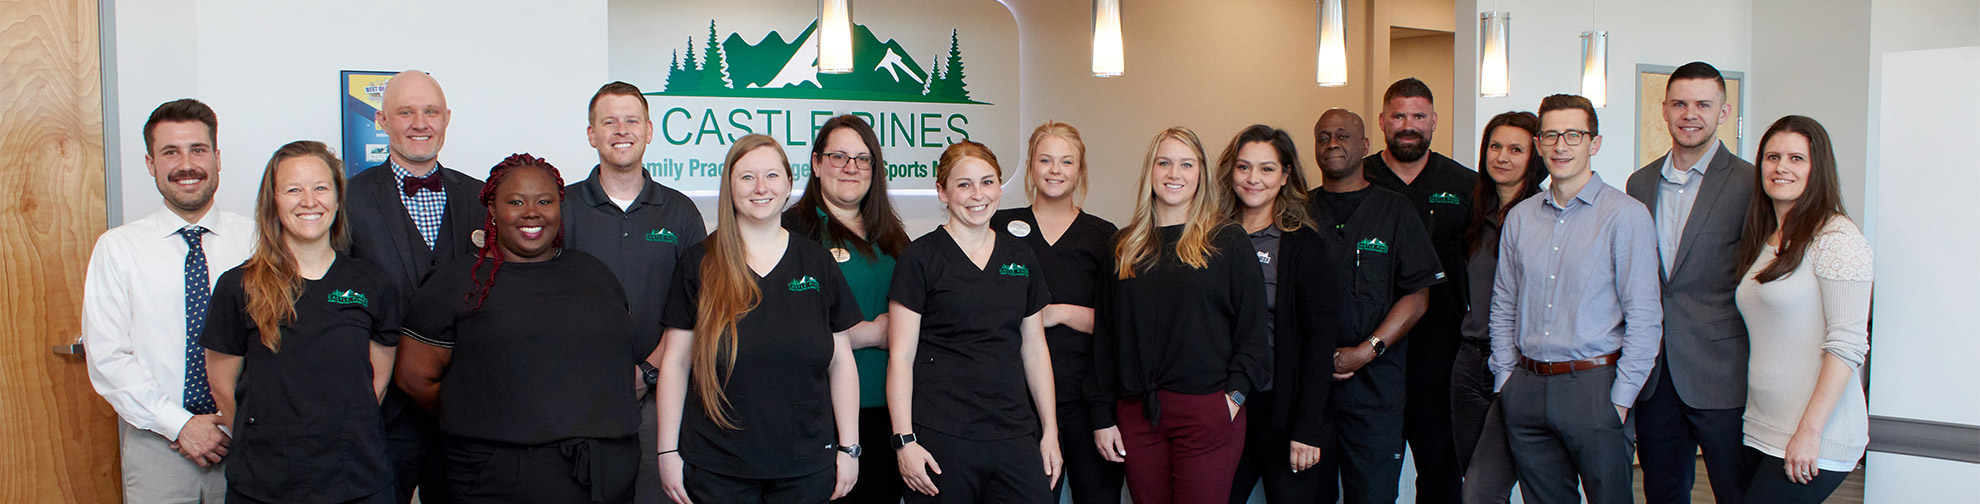 Castle Pines Family Practice and Urgent Care Group Photo